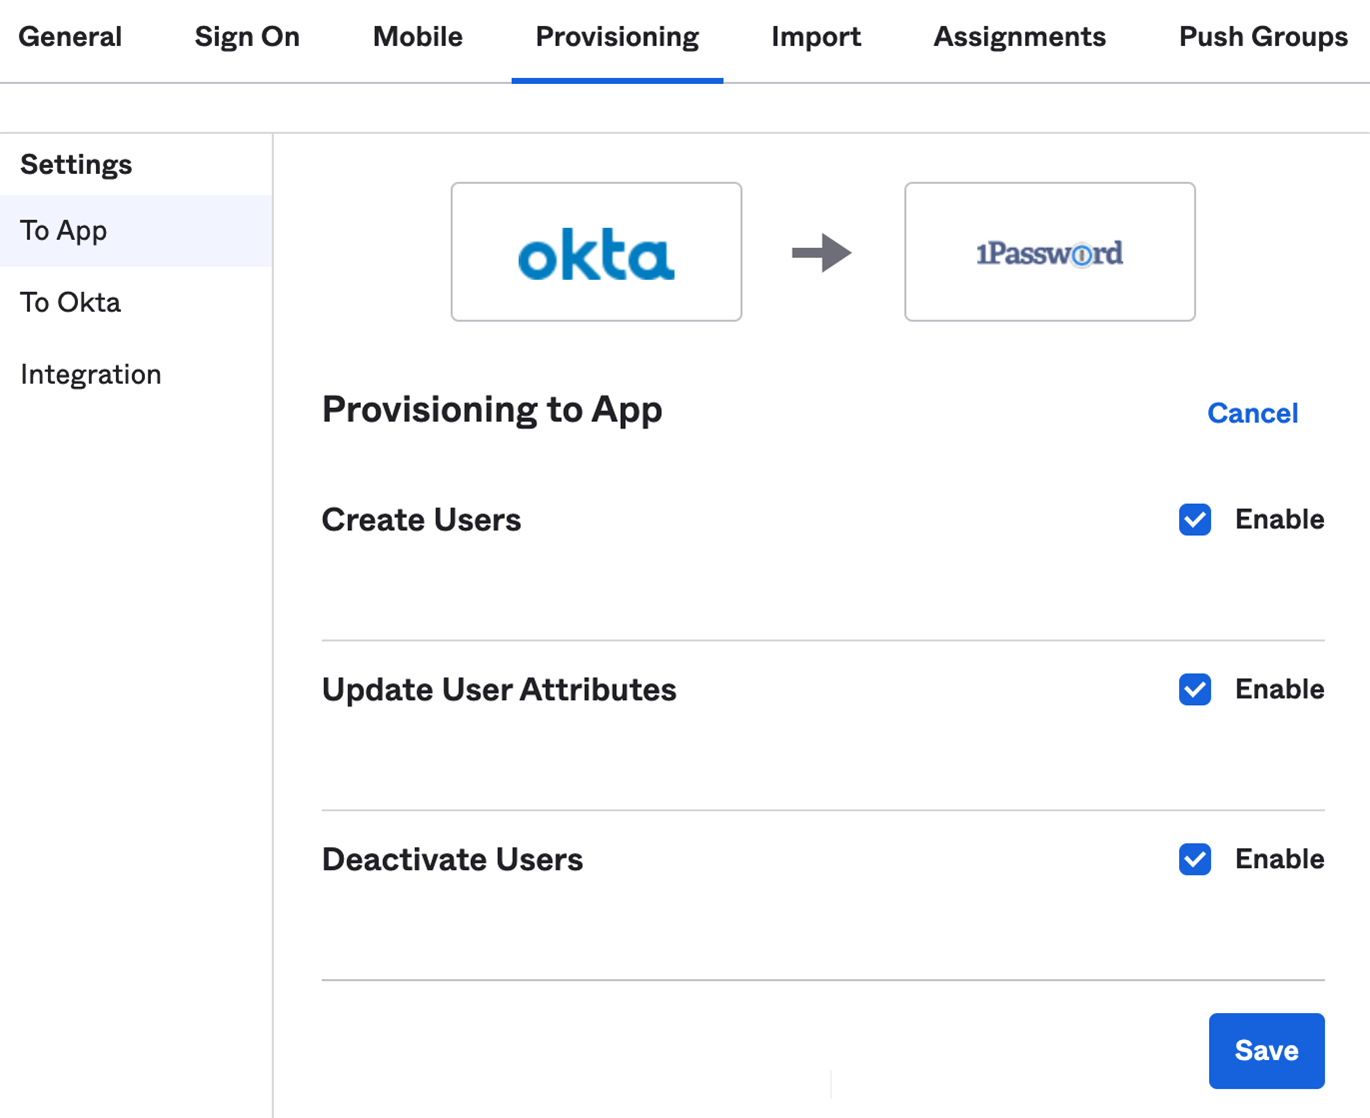 The To App settings for Provisioning with Create Users, Update User Attributes, and Deactivate Users turned on